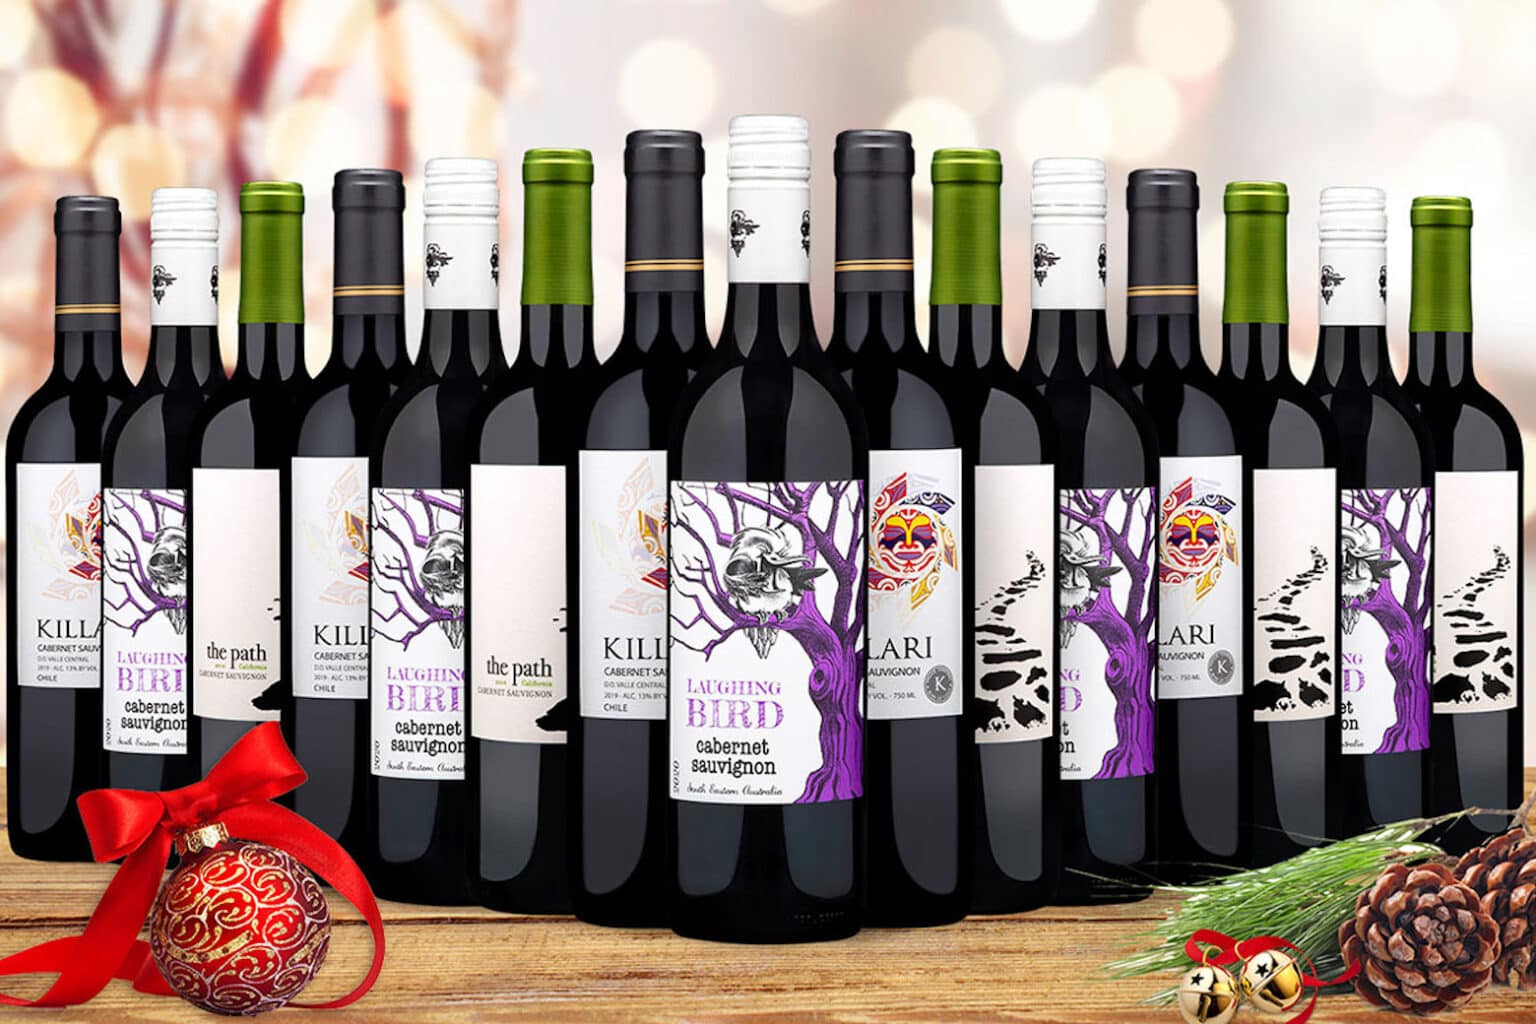 Get 15 bottles of wine shipped to your sweetie's doorstep for $79.99 this Valentine's Day.